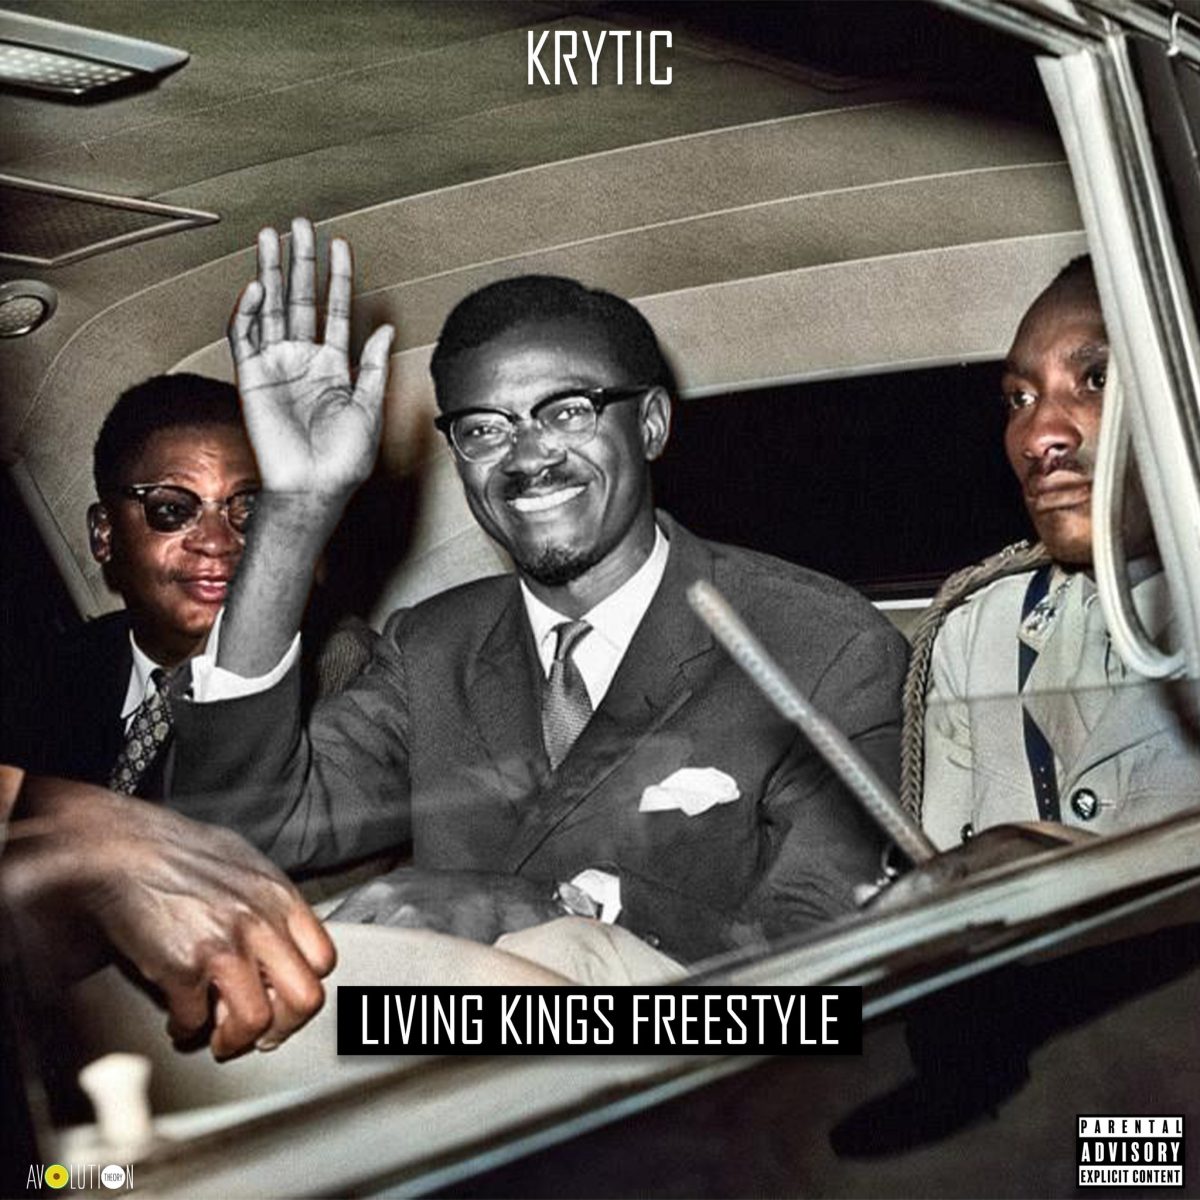 KRYTIC - Living Kings Freestyle (Jay-Z Cover)